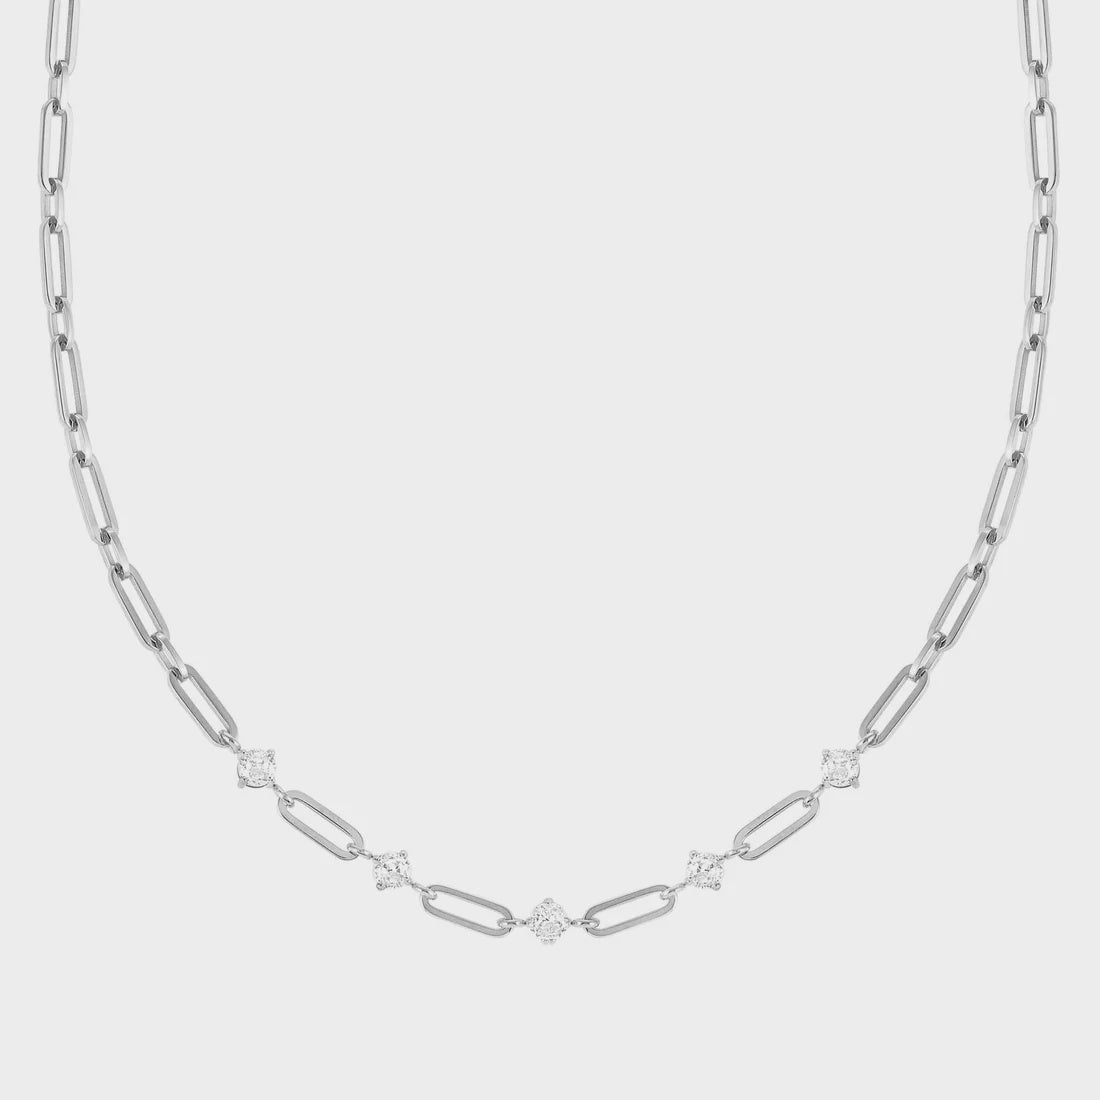 Nomination ChainsOfStyle Silver Necklace